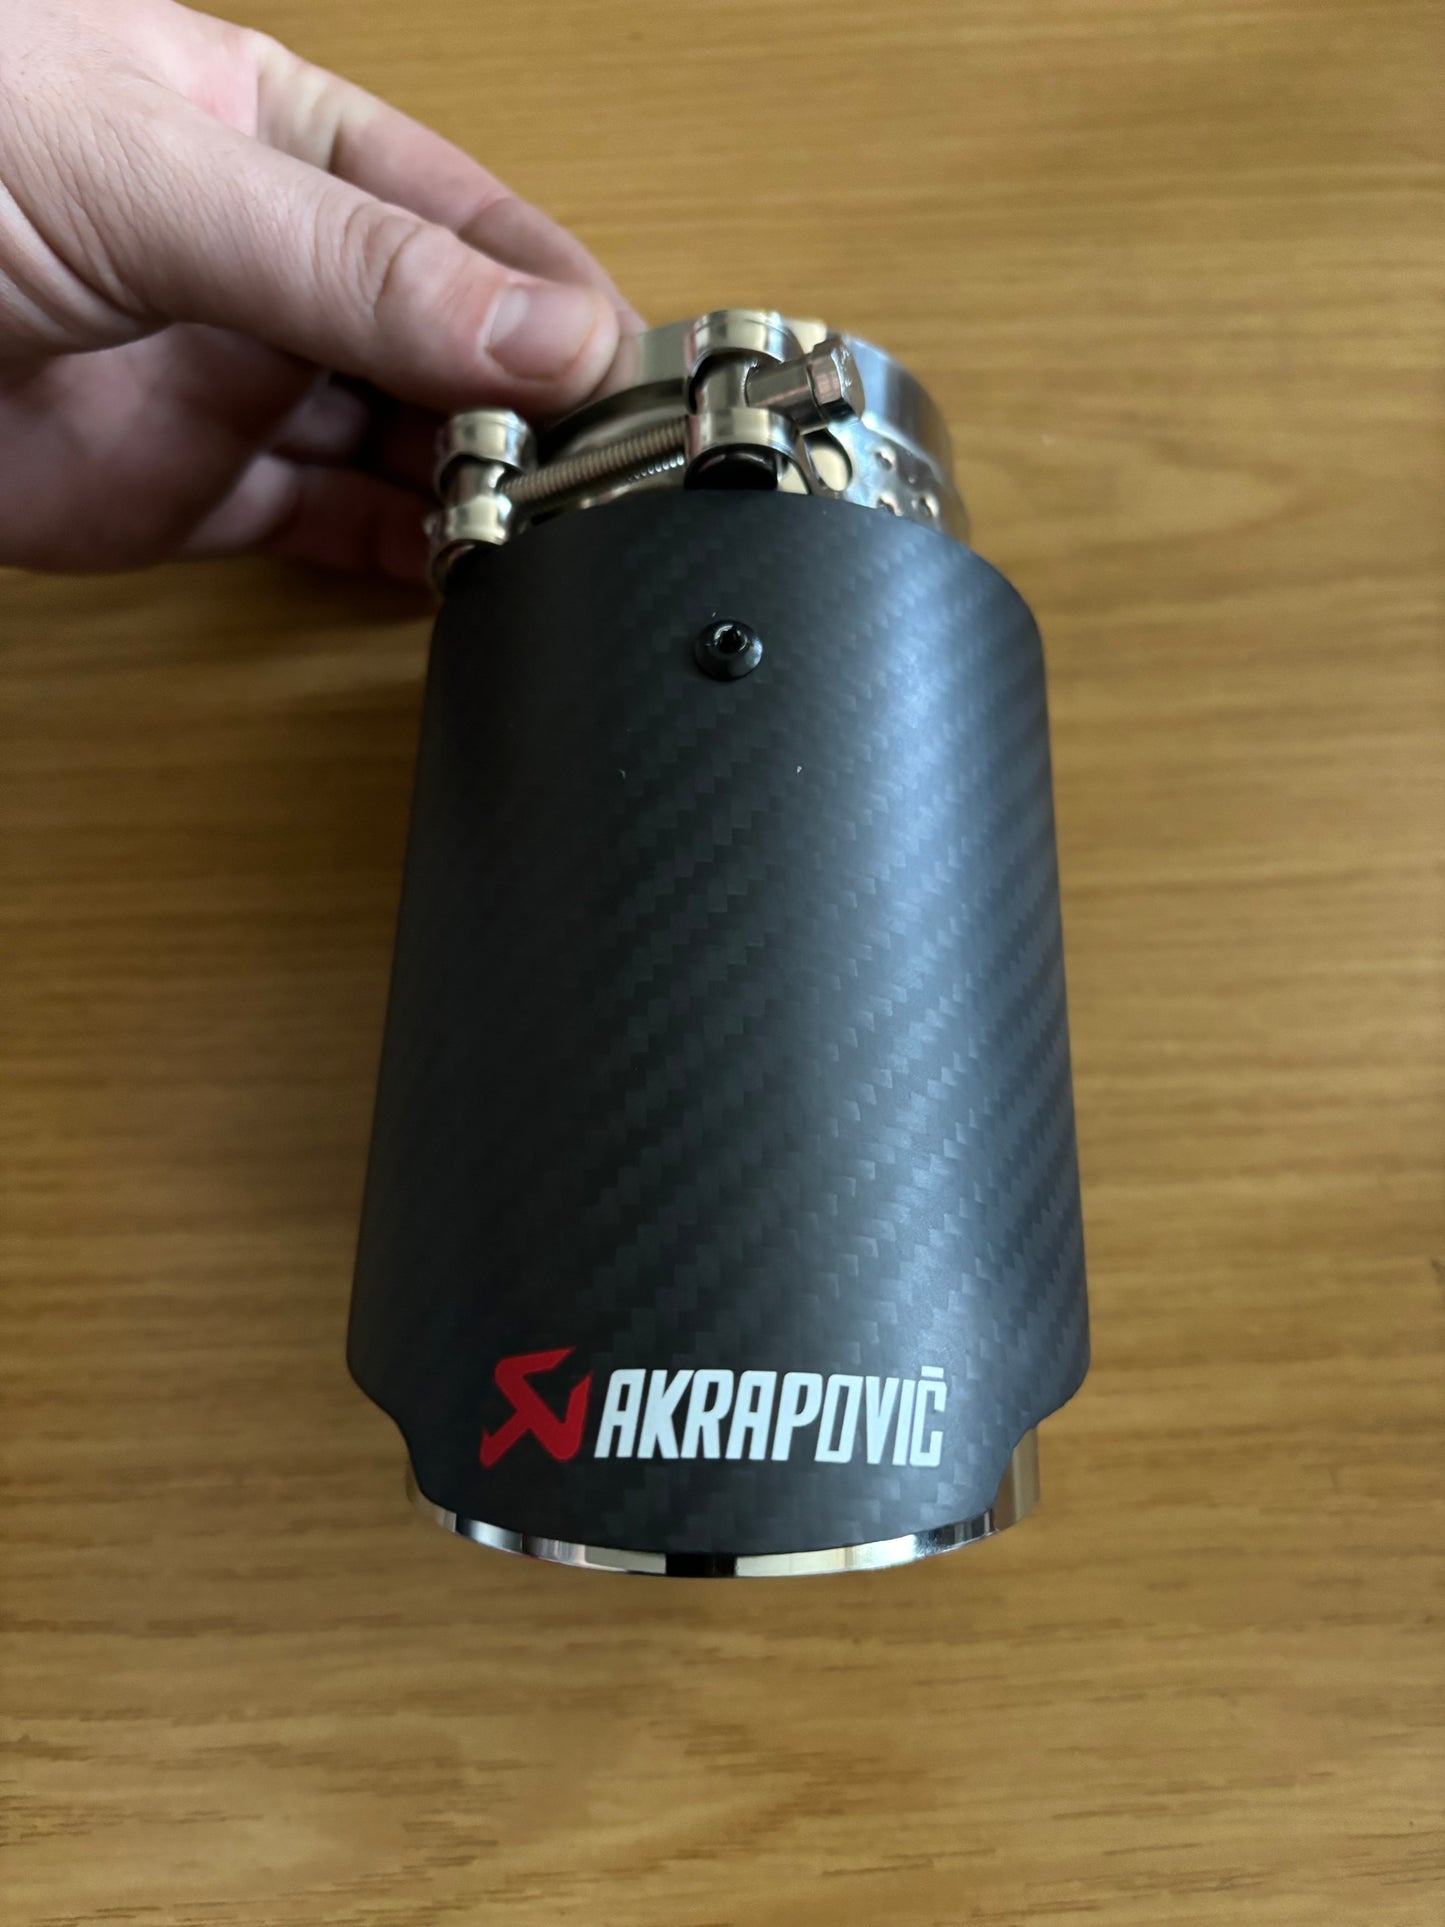 Akropovic 90mm bolt on exhaust tip